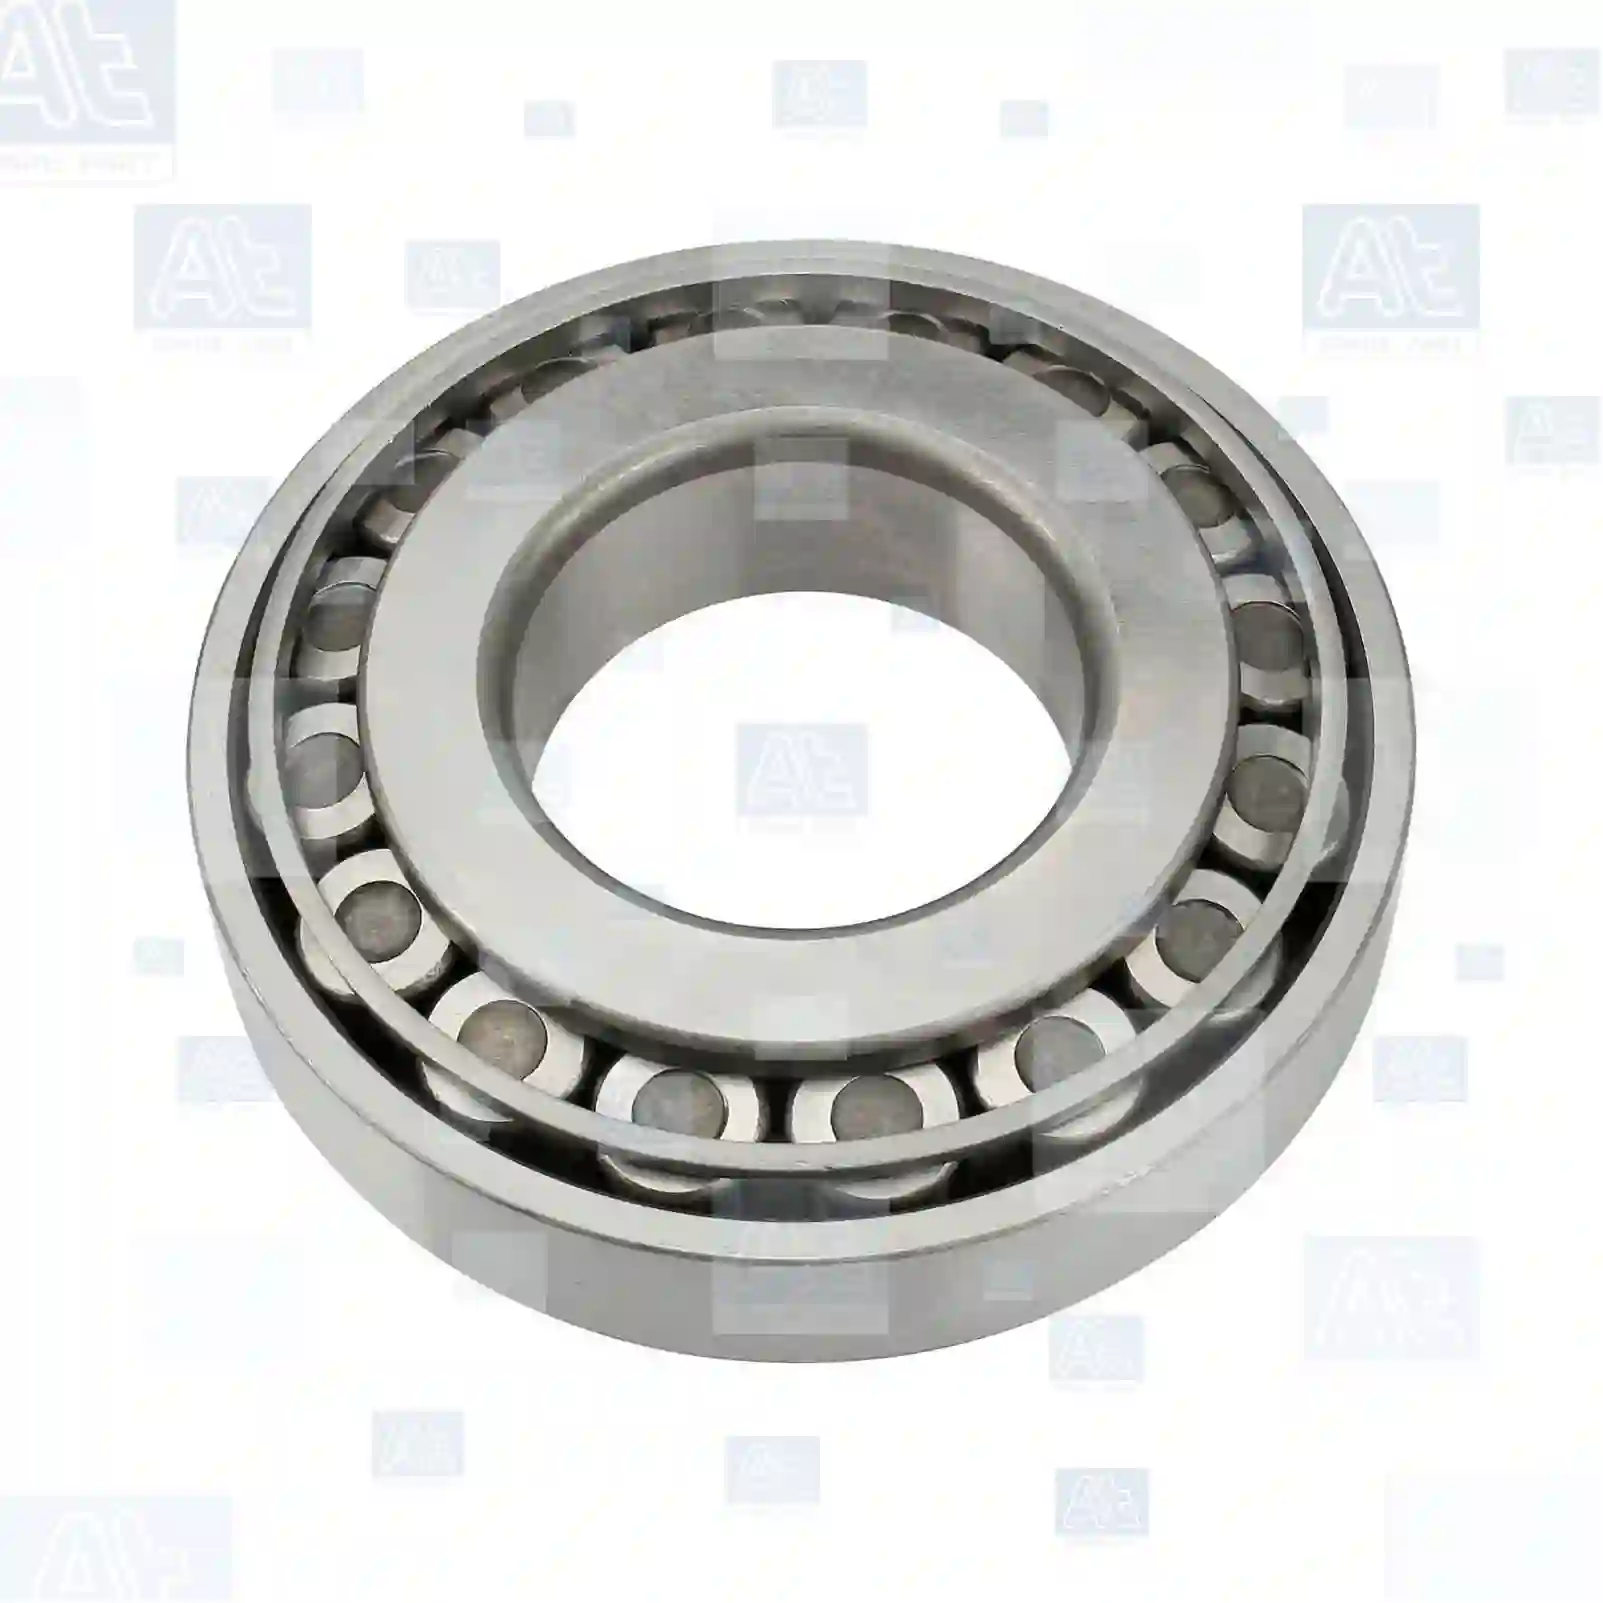 Tapered roller bearing, at no 77725194, oem no: 0264026000, 01102859, 94031454, 1-09812013-0, 1-09812023-0, 1-09812070-0, 01102859, 01109985, 06324890113, 0009810505, 0009818905, 0019819705, 0019899705, 0029810205, 0029816005, 0039816205, 0069816505, 0089818805, 0109810005, 0109812805, 0109812905, 0109815505, 0129818805, 0129819205, 0129819405, 0139818405, 0169811205, 3449817005, MH043008, 38326-90002, 40208-90009, 4200001500, 1357711, 366305, ZG02968-0008 At Spare Part | Engine, Accelerator Pedal, Camshaft, Connecting Rod, Crankcase, Crankshaft, Cylinder Head, Engine Suspension Mountings, Exhaust Manifold, Exhaust Gas Recirculation, Filter Kits, Flywheel Housing, General Overhaul Kits, Engine, Intake Manifold, Oil Cleaner, Oil Cooler, Oil Filter, Oil Pump, Oil Sump, Piston & Liner, Sensor & Switch, Timing Case, Turbocharger, Cooling System, Belt Tensioner, Coolant Filter, Coolant Pipe, Corrosion Prevention Agent, Drive, Expansion Tank, Fan, Intercooler, Monitors & Gauges, Radiator, Thermostat, V-Belt / Timing belt, Water Pump, Fuel System, Electronical Injector Unit, Feed Pump, Fuel Filter, cpl., Fuel Gauge Sender,  Fuel Line, Fuel Pump, Fuel Tank, Injection Line Kit, Injection Pump, Exhaust System, Clutch & Pedal, Gearbox, Propeller Shaft, Axles, Brake System, Hubs & Wheels, Suspension, Leaf Spring, Universal Parts / Accessories, Steering, Electrical System, Cabin Tapered roller bearing, at no 77725194, oem no: 0264026000, 01102859, 94031454, 1-09812013-0, 1-09812023-0, 1-09812070-0, 01102859, 01109985, 06324890113, 0009810505, 0009818905, 0019819705, 0019899705, 0029810205, 0029816005, 0039816205, 0069816505, 0089818805, 0109810005, 0109812805, 0109812905, 0109815505, 0129818805, 0129819205, 0129819405, 0139818405, 0169811205, 3449817005, MH043008, 38326-90002, 40208-90009, 4200001500, 1357711, 366305, ZG02968-0008 At Spare Part | Engine, Accelerator Pedal, Camshaft, Connecting Rod, Crankcase, Crankshaft, Cylinder Head, Engine Suspension Mountings, Exhaust Manifold, Exhaust Gas Recirculation, Filter Kits, Flywheel Housing, General Overhaul Kits, Engine, Intake Manifold, Oil Cleaner, Oil Cooler, Oil Filter, Oil Pump, Oil Sump, Piston & Liner, Sensor & Switch, Timing Case, Turbocharger, Cooling System, Belt Tensioner, Coolant Filter, Coolant Pipe, Corrosion Prevention Agent, Drive, Expansion Tank, Fan, Intercooler, Monitors & Gauges, Radiator, Thermostat, V-Belt / Timing belt, Water Pump, Fuel System, Electronical Injector Unit, Feed Pump, Fuel Filter, cpl., Fuel Gauge Sender,  Fuel Line, Fuel Pump, Fuel Tank, Injection Line Kit, Injection Pump, Exhaust System, Clutch & Pedal, Gearbox, Propeller Shaft, Axles, Brake System, Hubs & Wheels, Suspension, Leaf Spring, Universal Parts / Accessories, Steering, Electrical System, Cabin